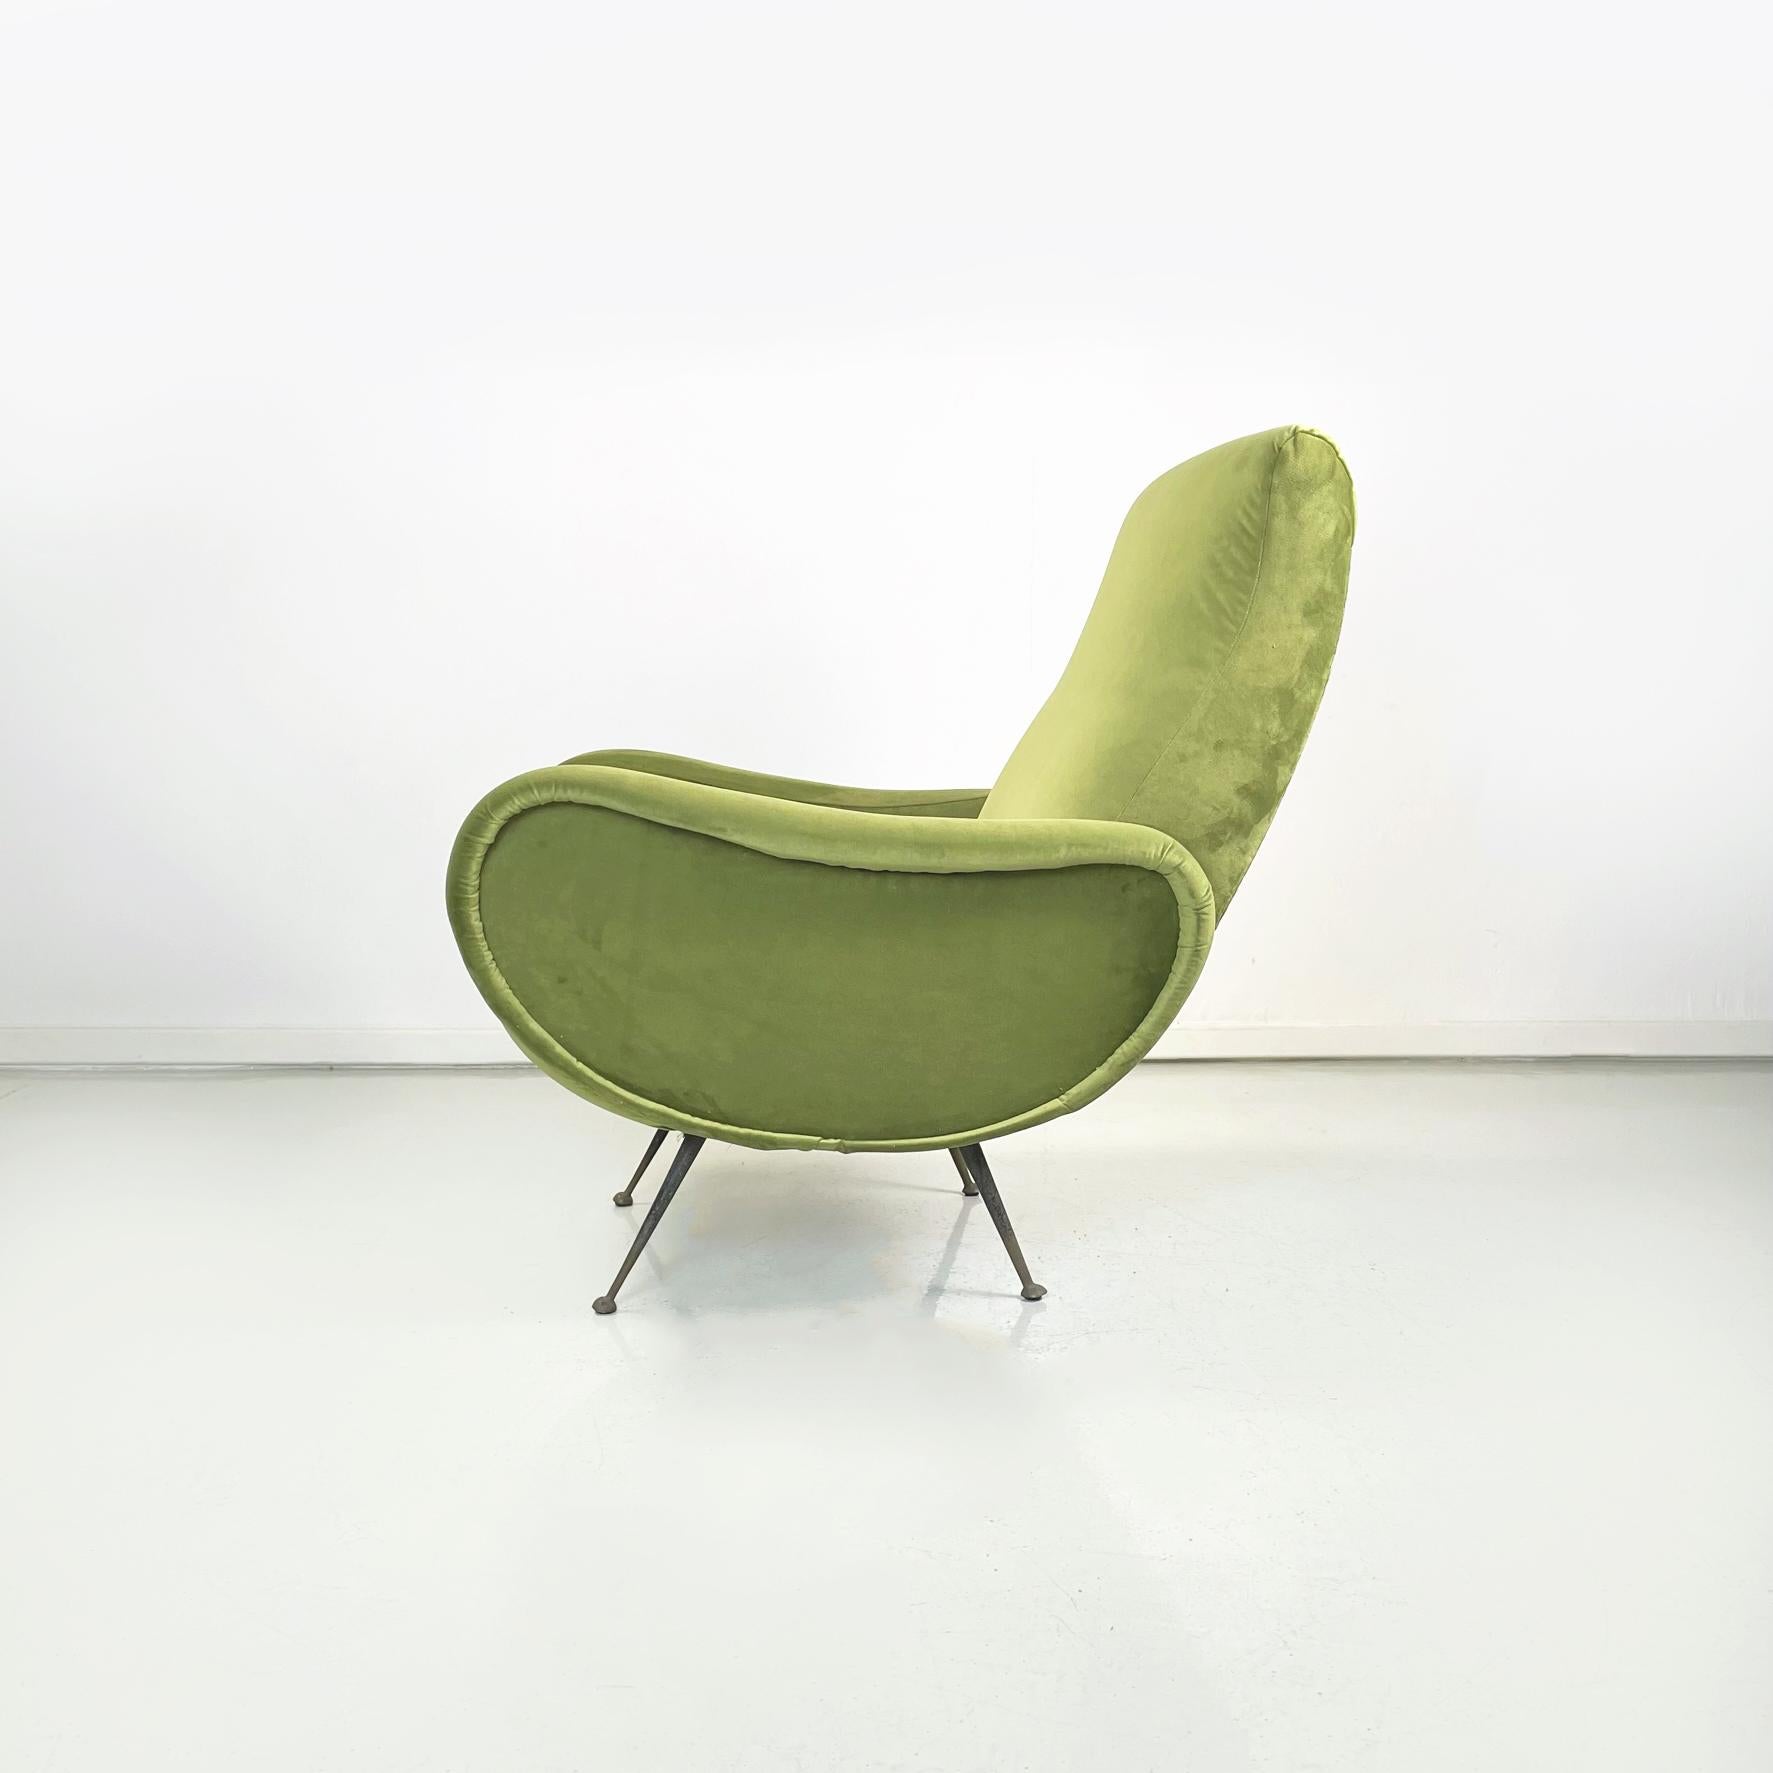 Italian Midcentury Green Velvet and Black Metal Armchairs in Lady Style, 1950s In Good Condition For Sale In MIlano, IT